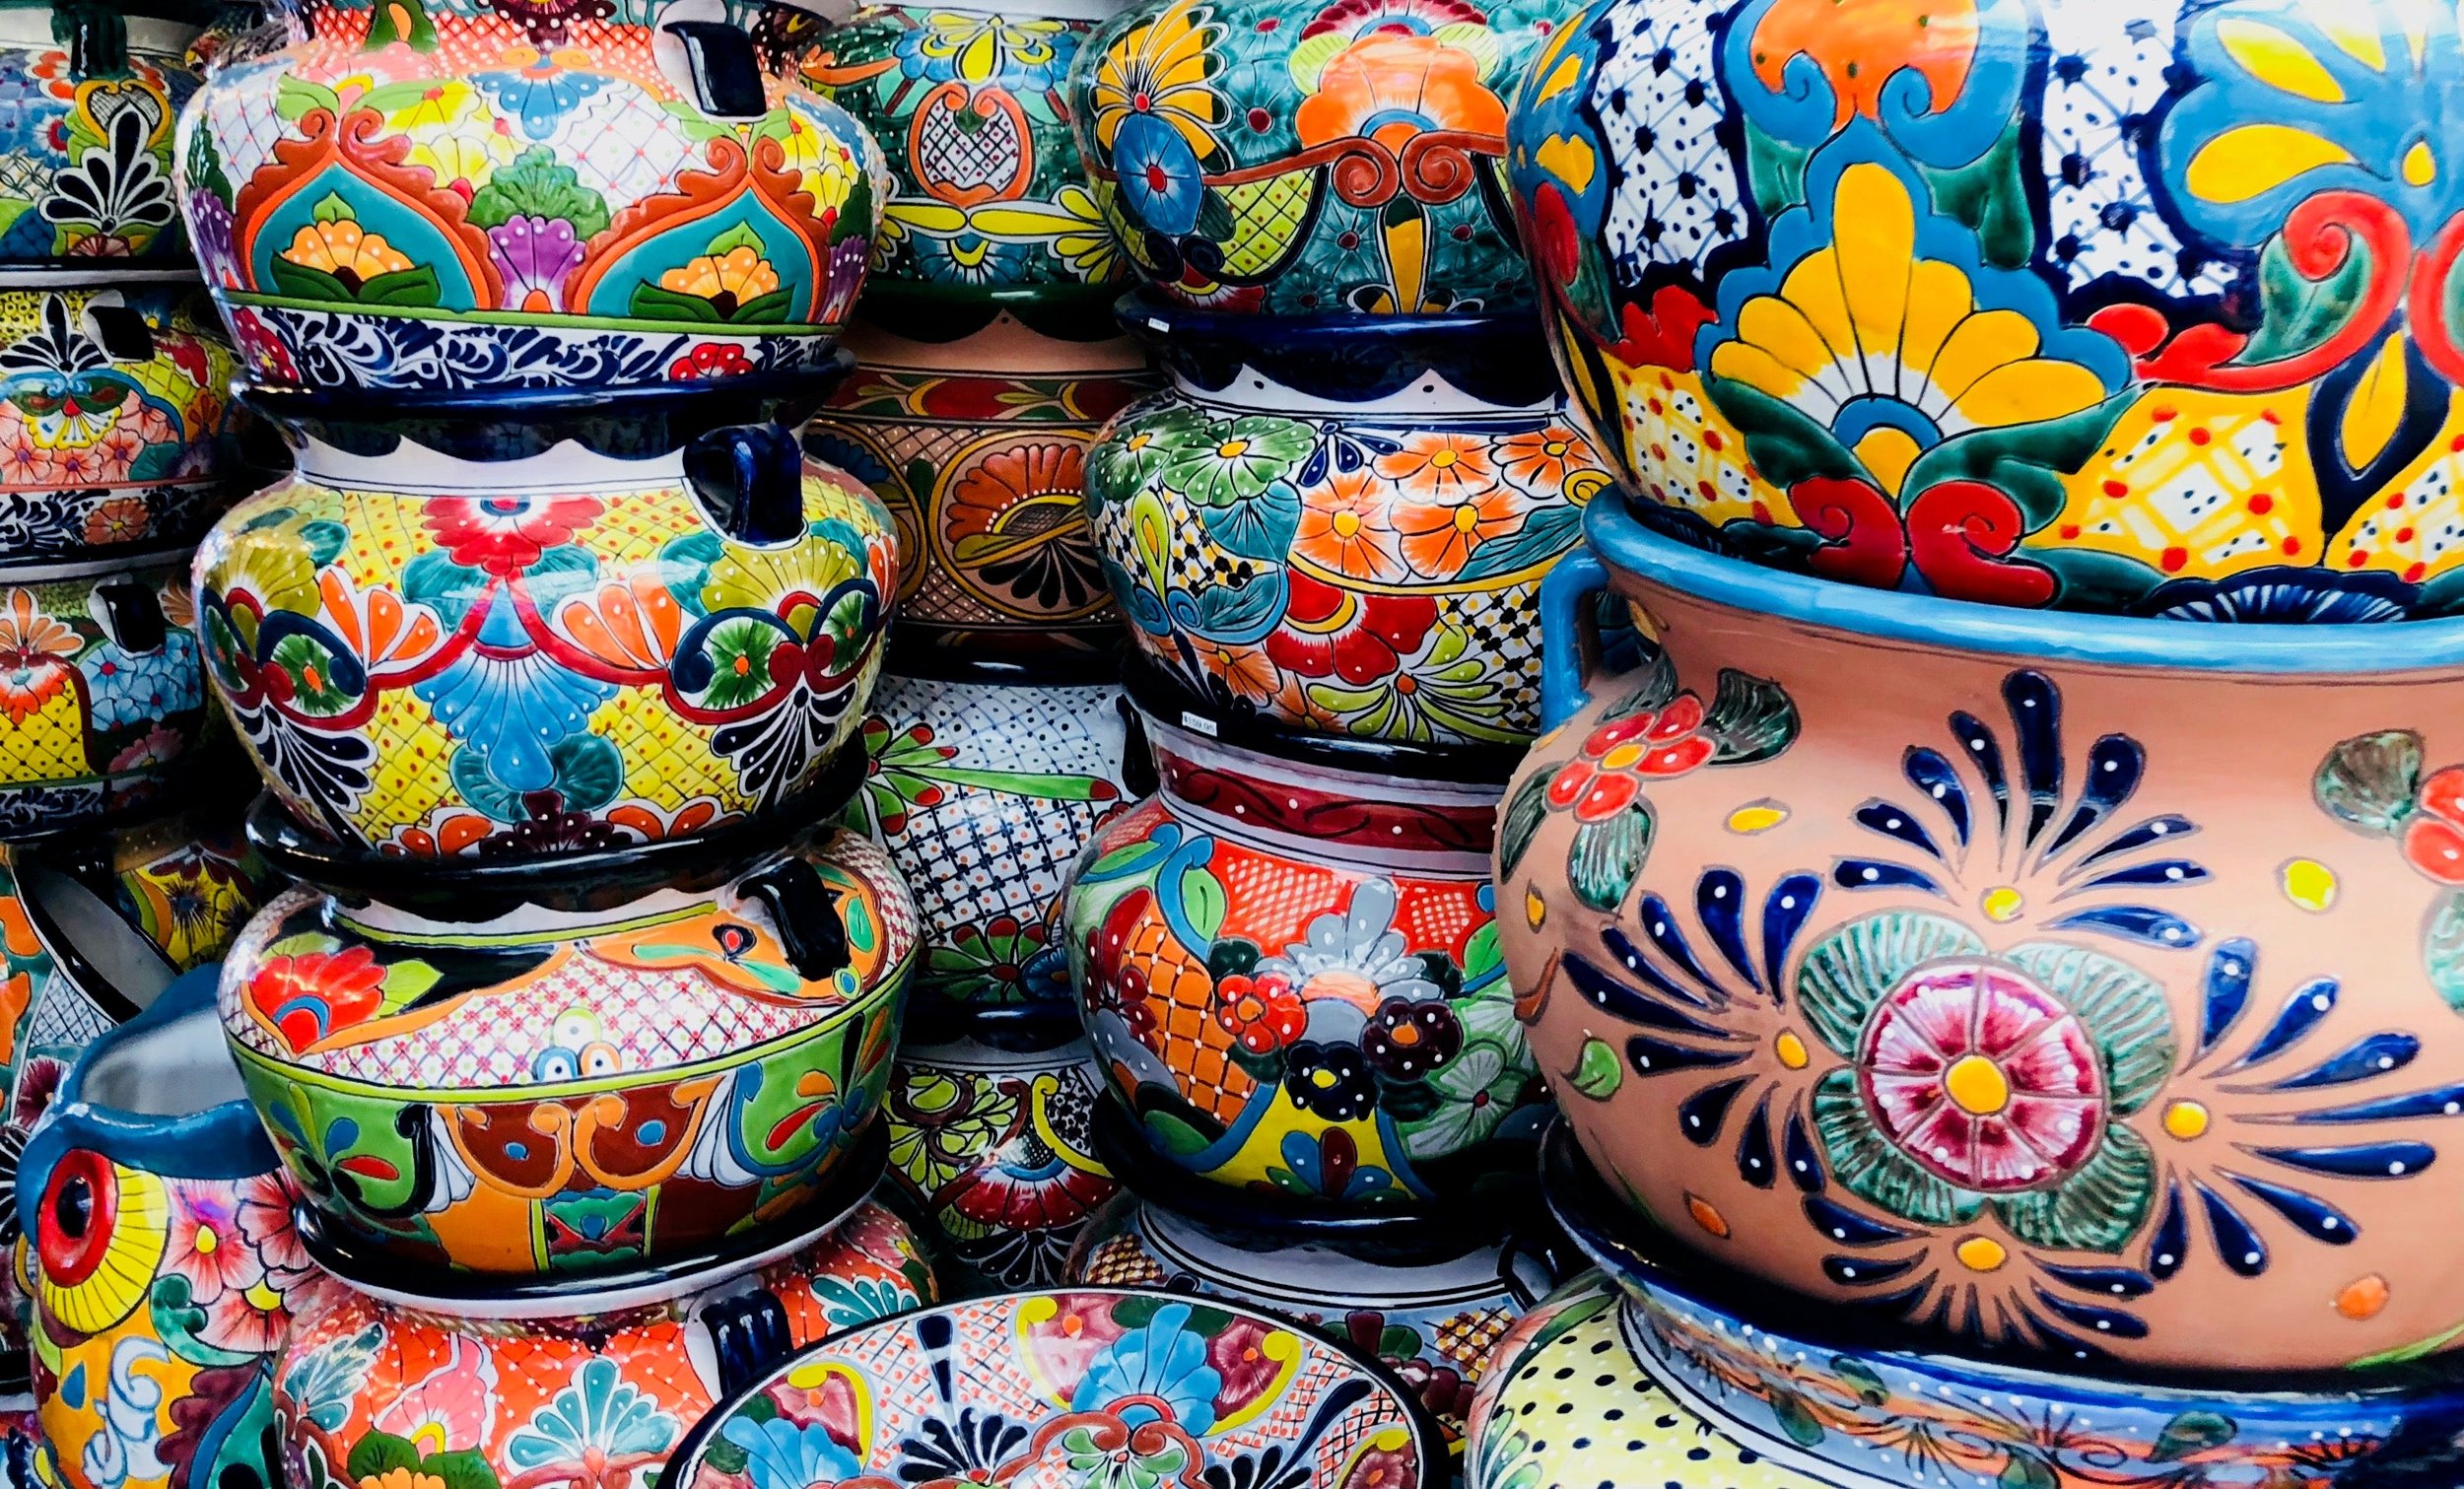 decorated-pots-stacked-up.jpg